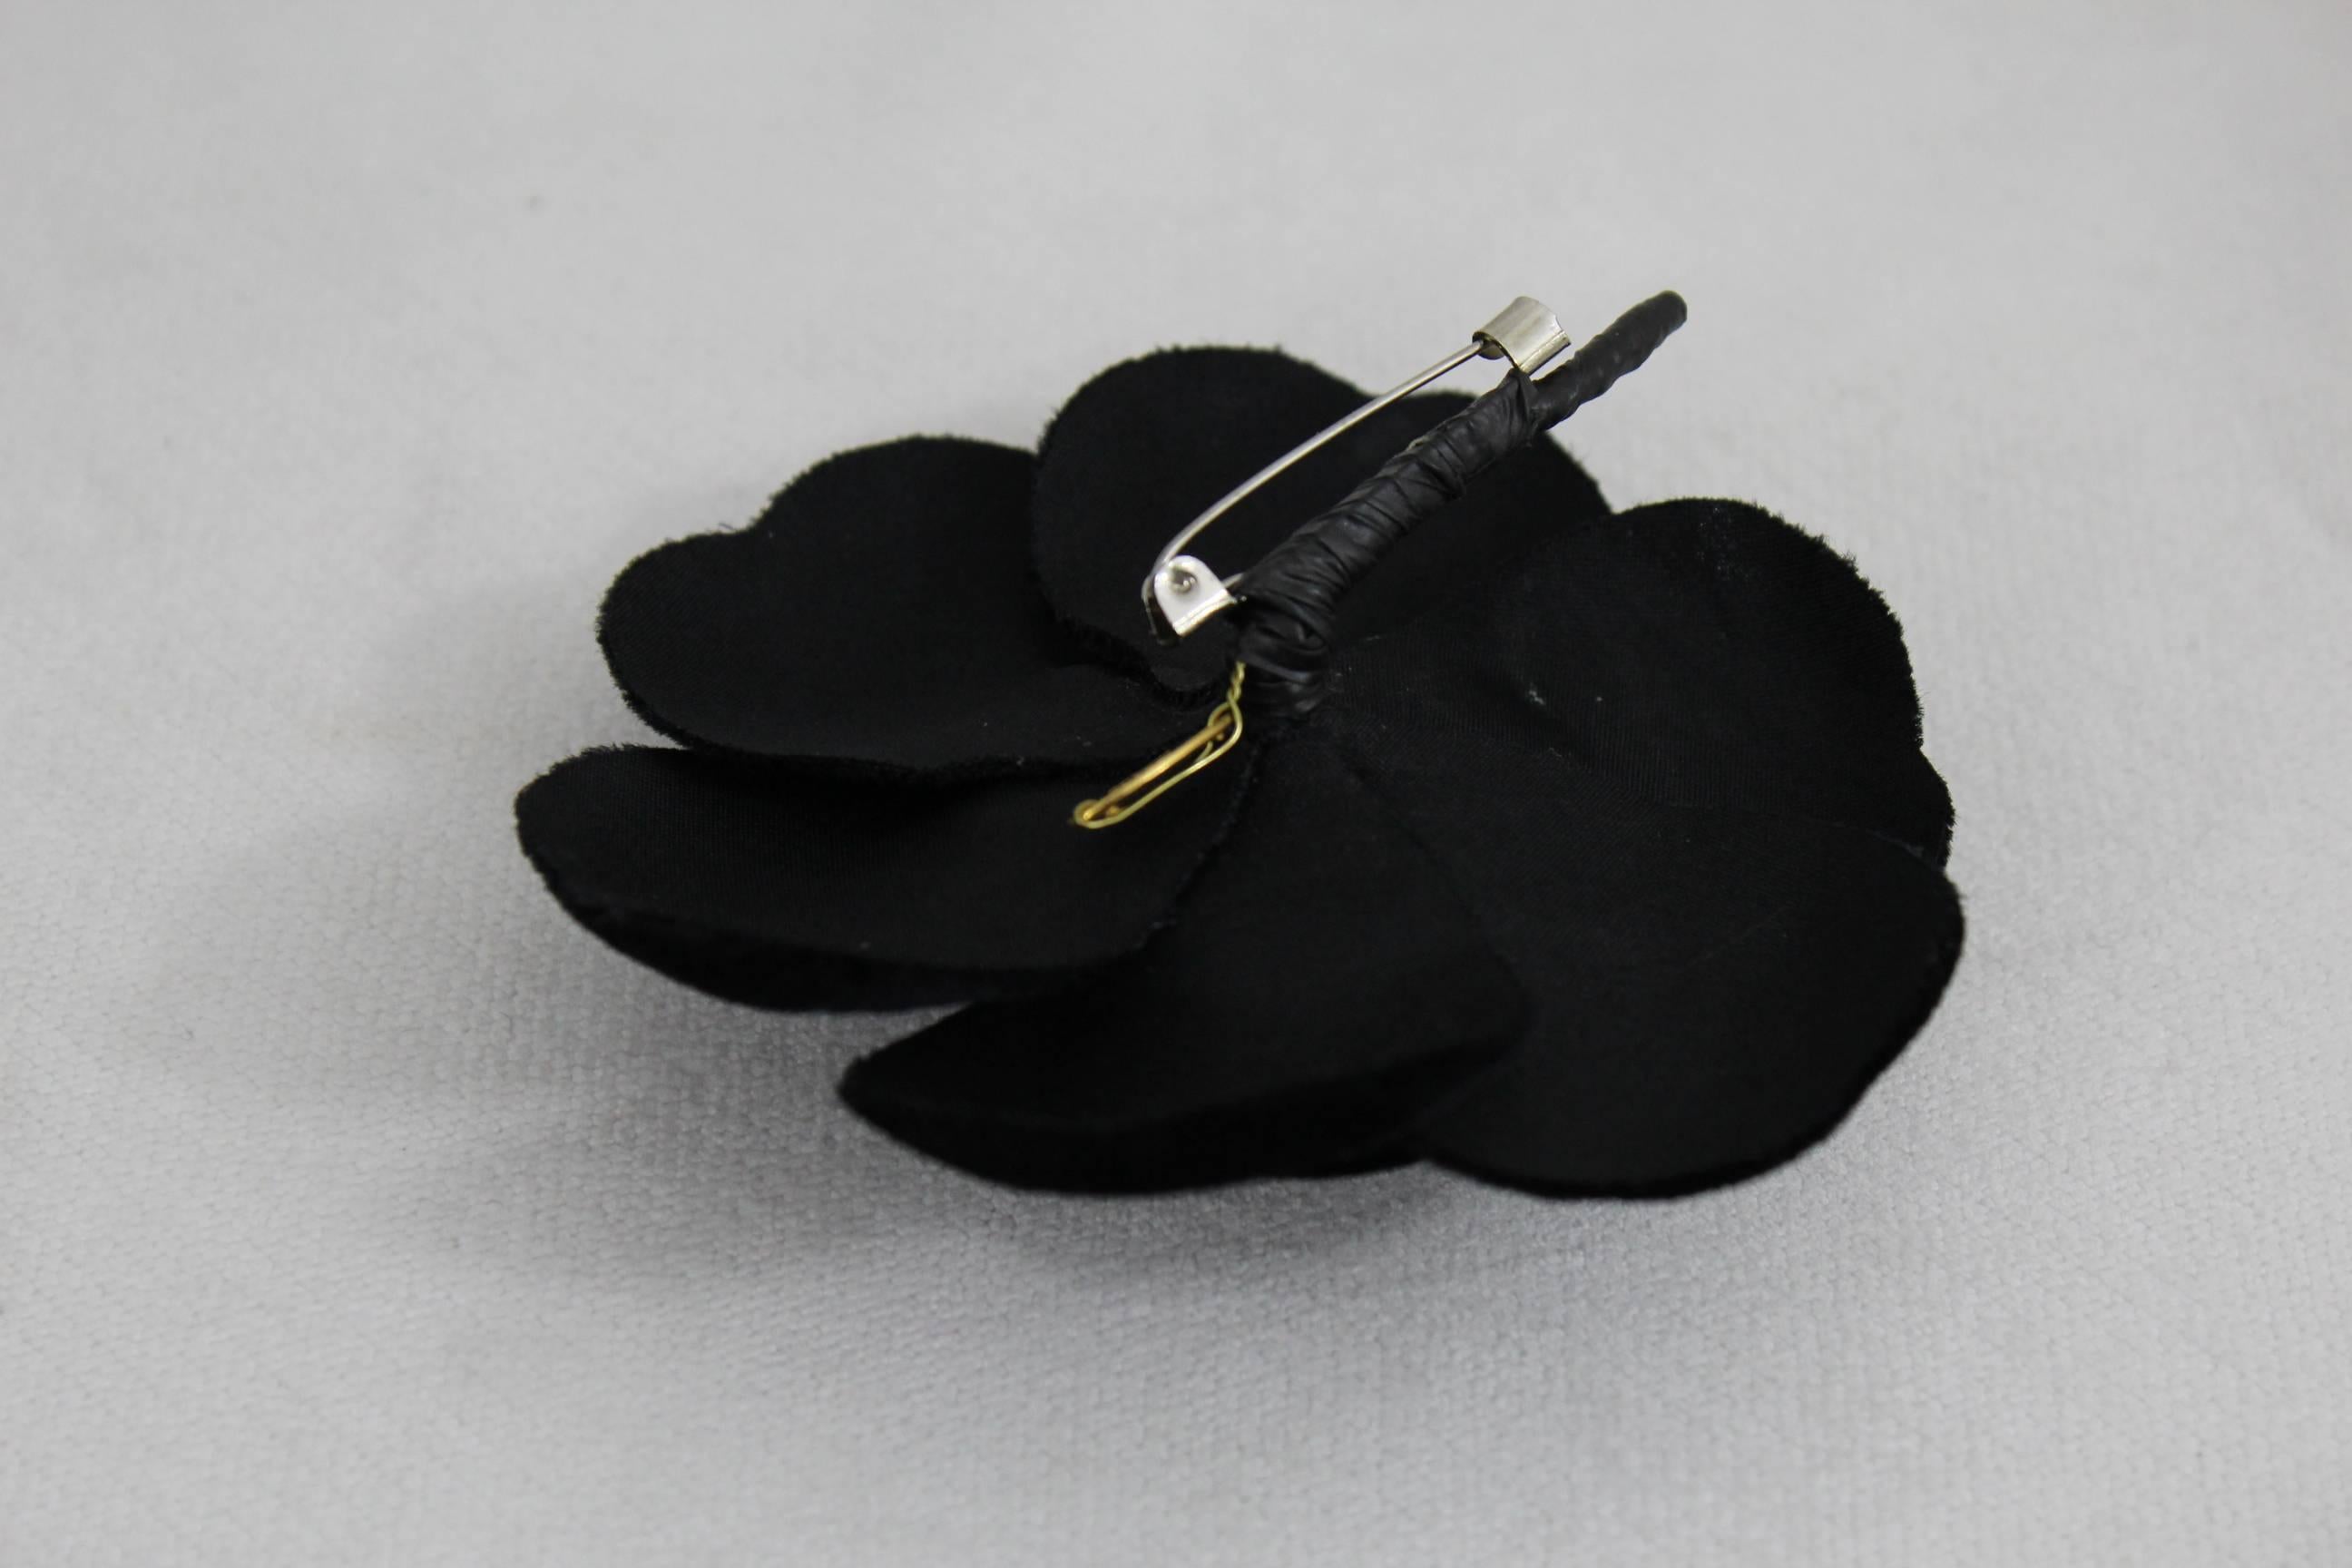 Really nicie Vntage Black velvet camelia brooche.

Good condtion, no defect

Signes in the back

Diameter around 3,5 inches